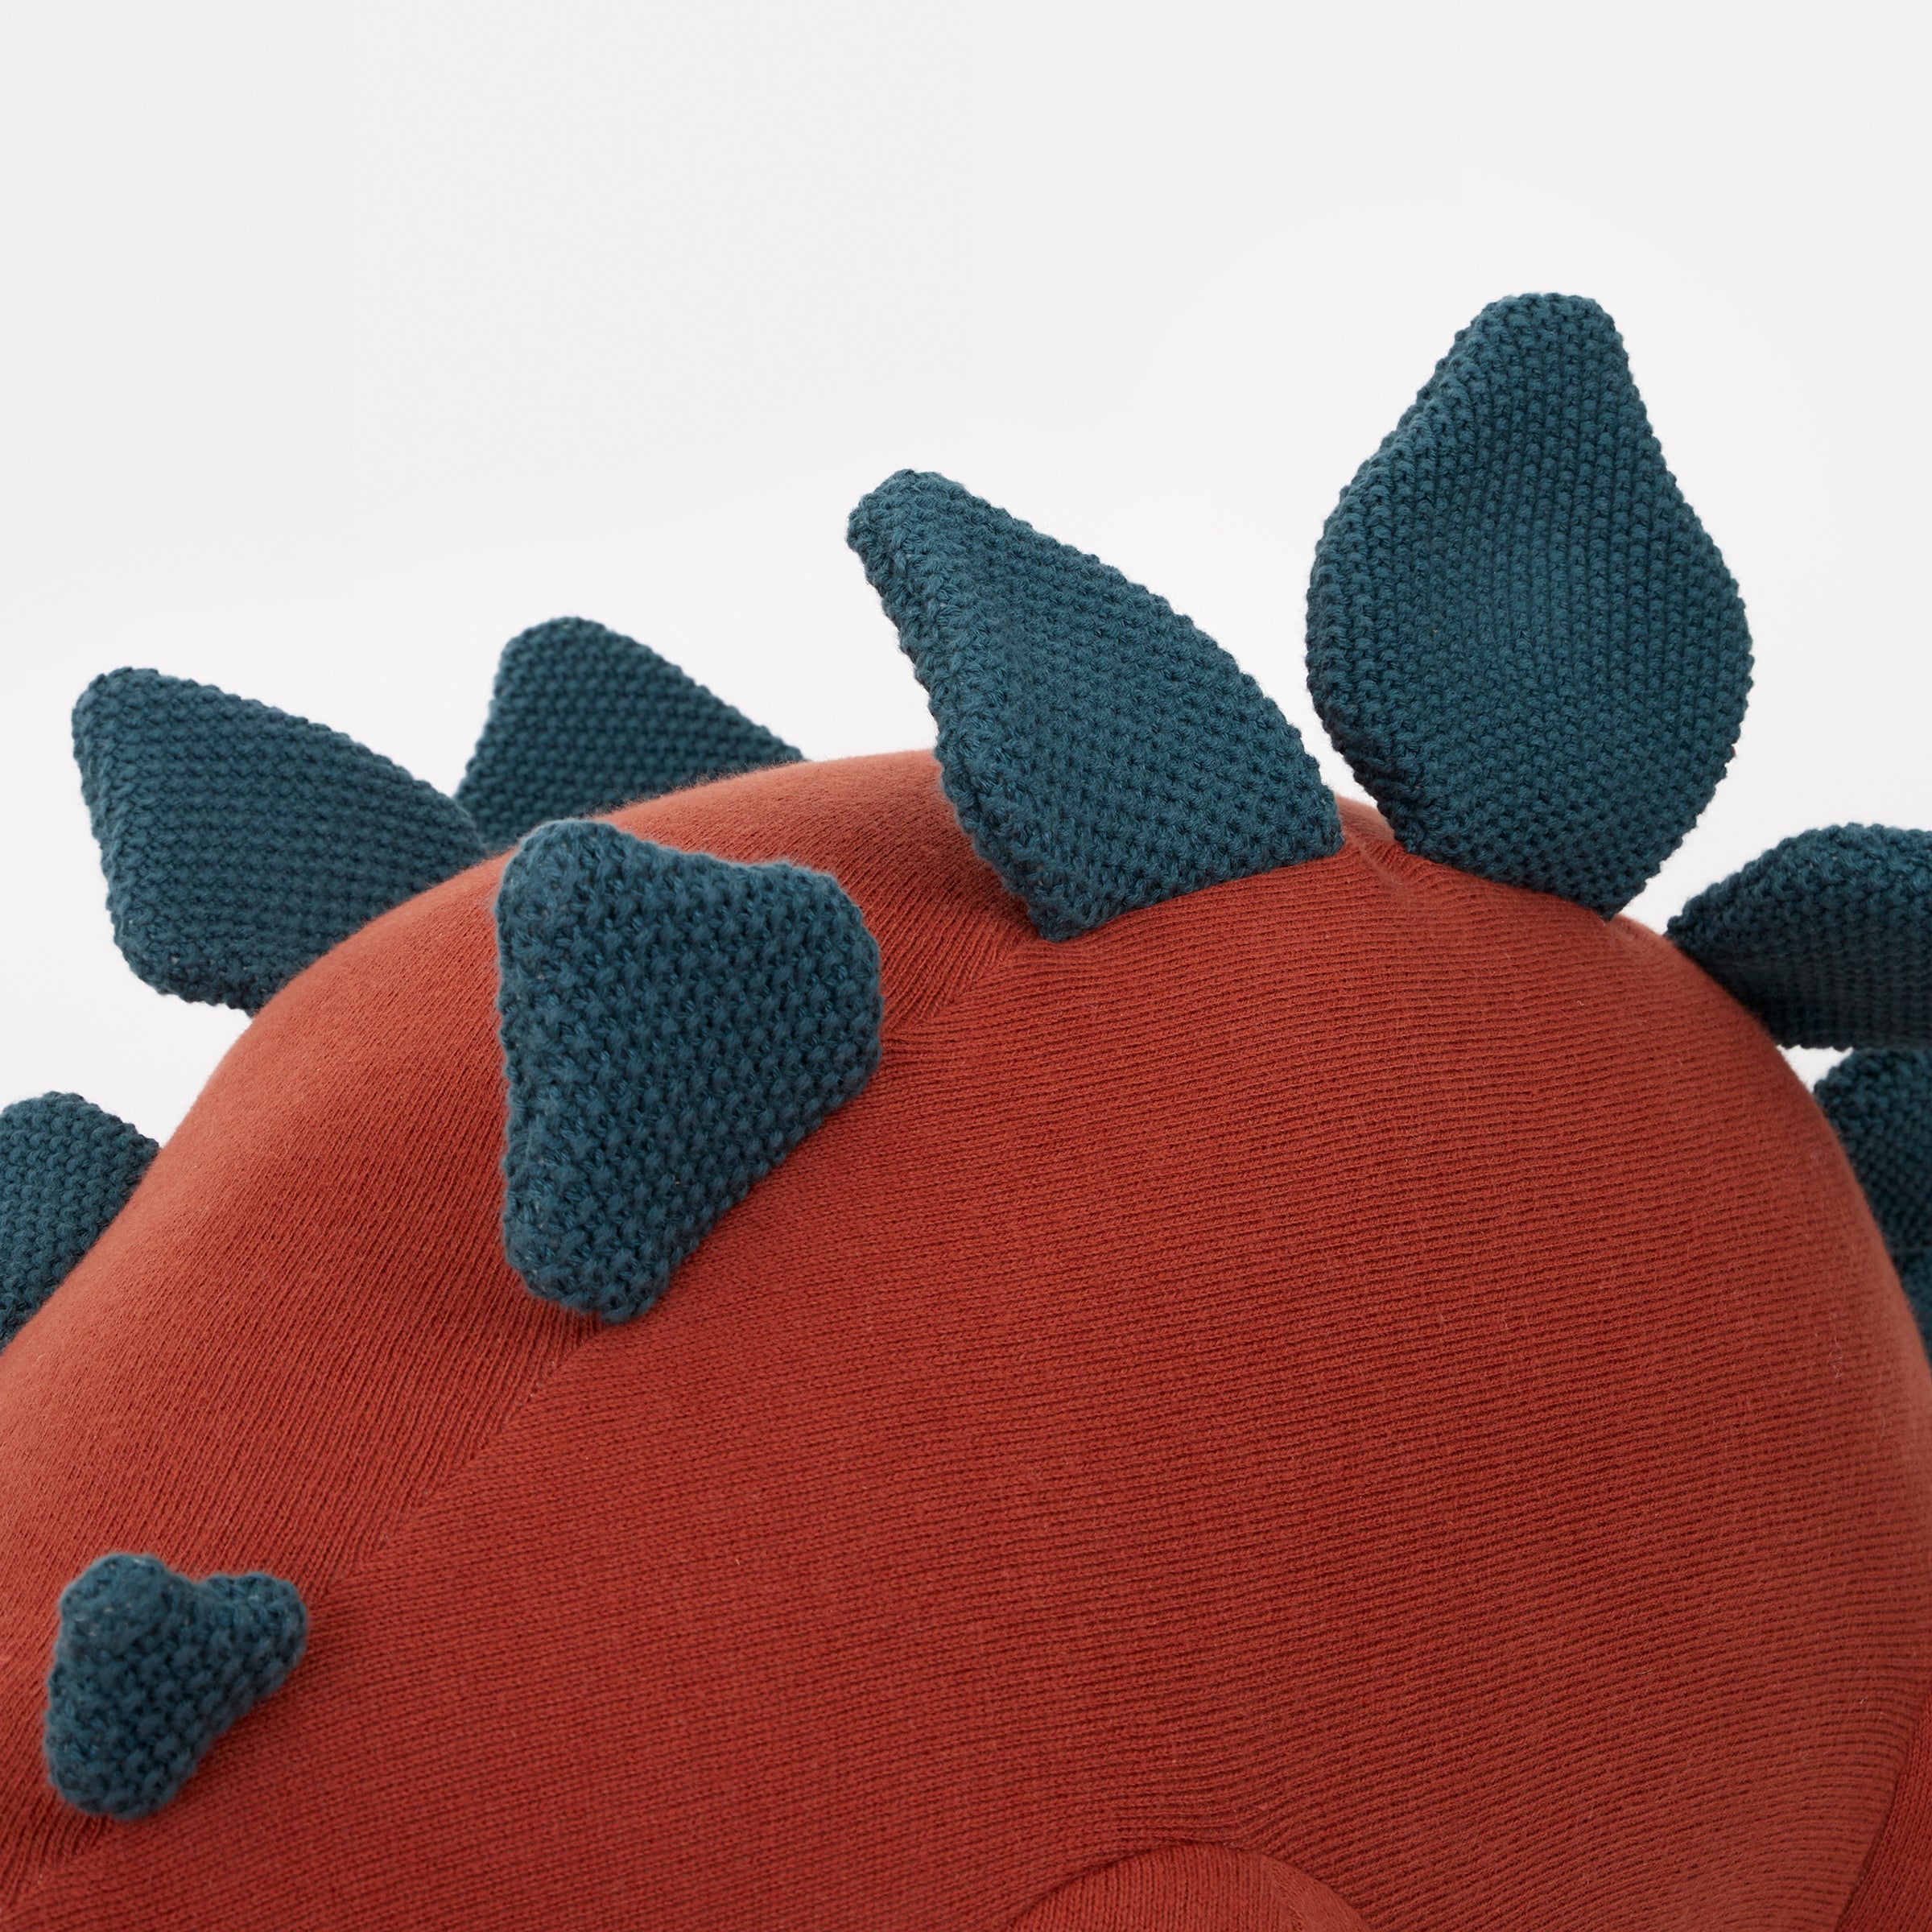 Bruce the stegosaurus toy is a fabulous kid's soft toy crafted from knitted organic cotton.